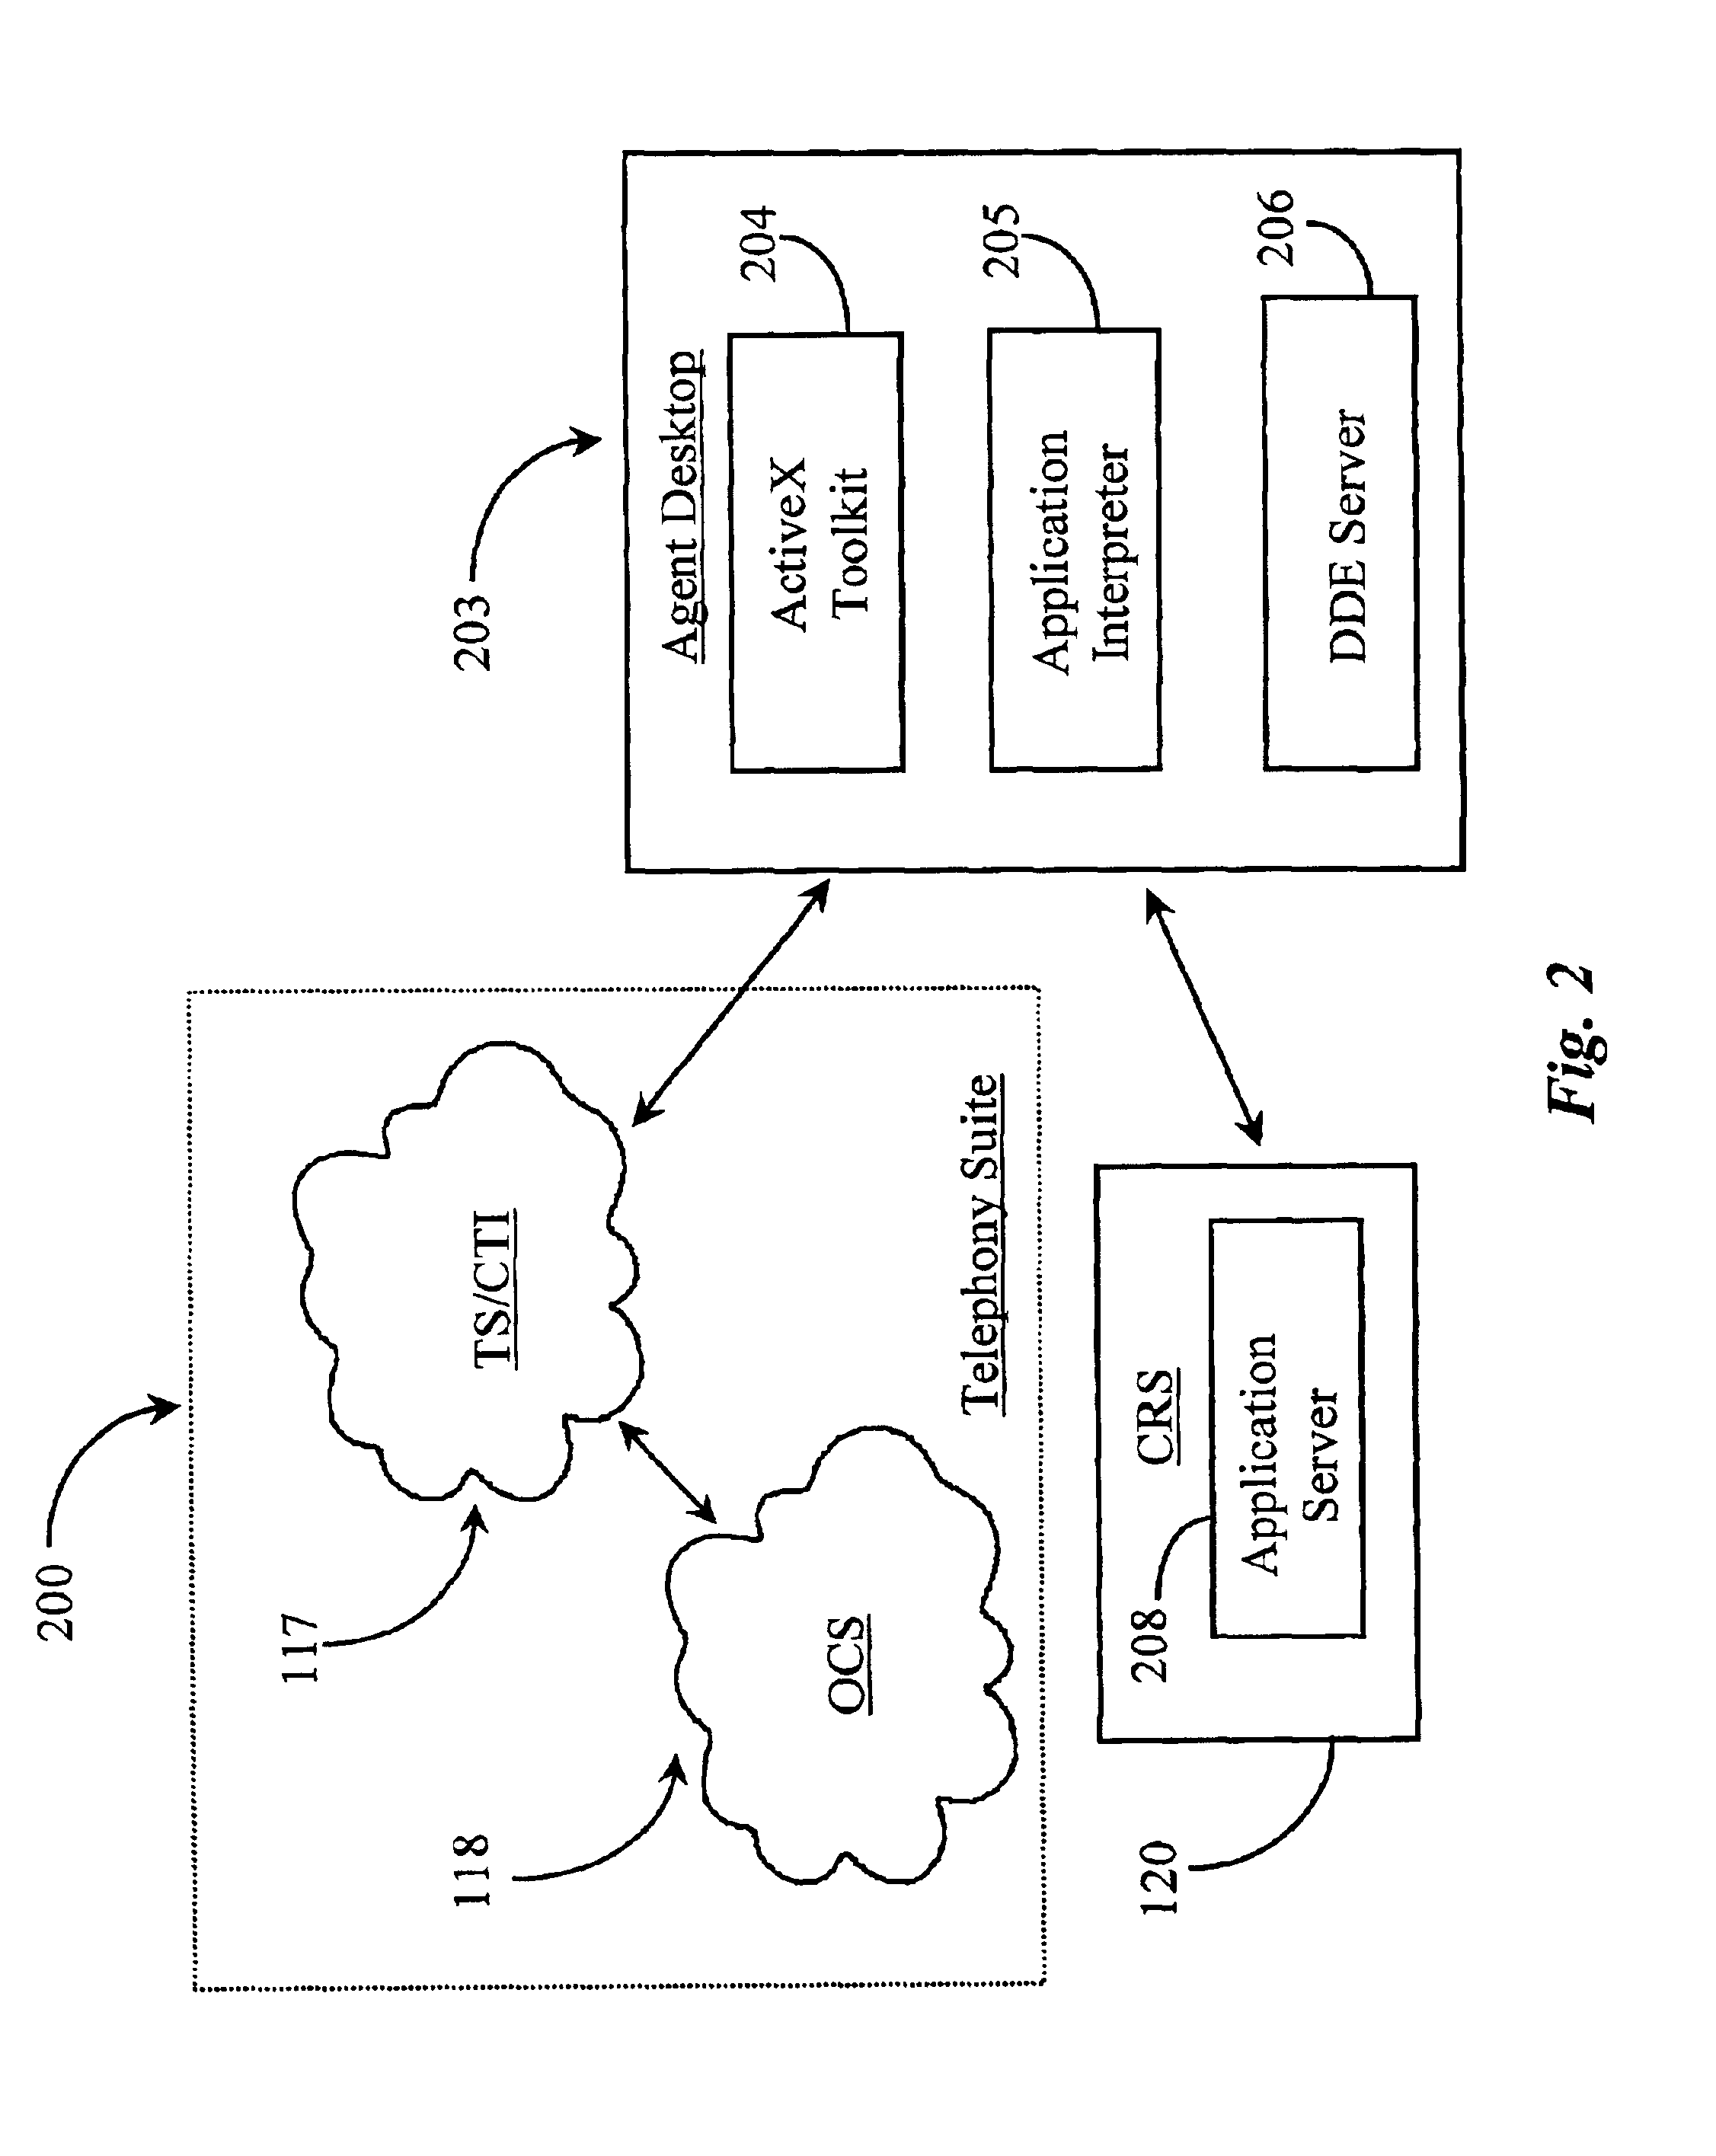 Method and apparatus for building communication between agent desktop scripting applications and an outbound call software suite within a telecommunications center